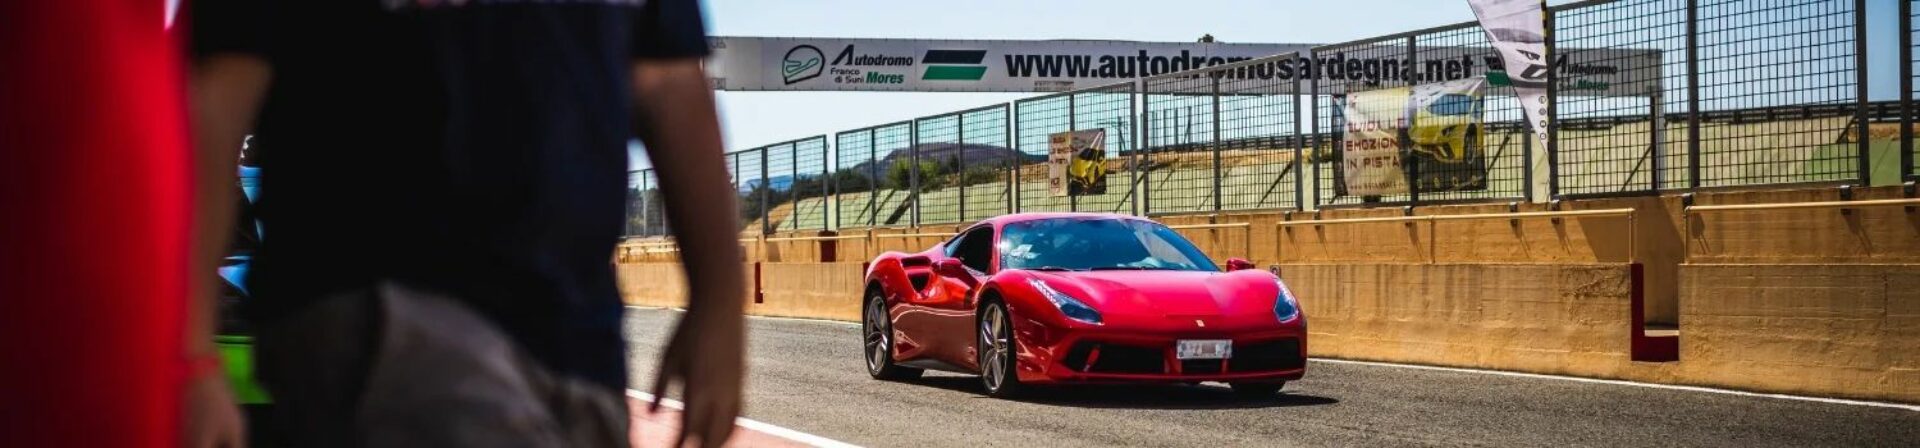 Driving Experience Autodromo Mores